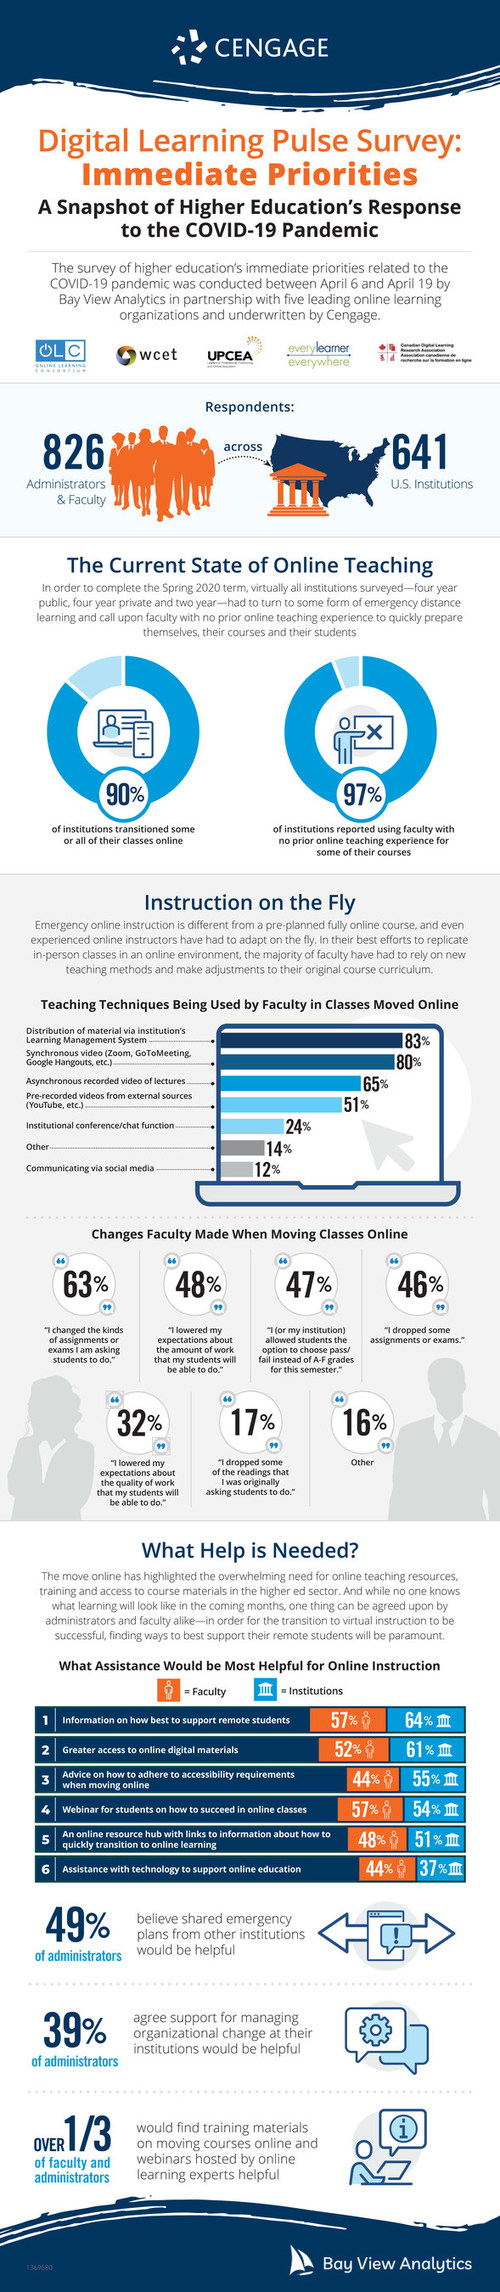 This spring most colleges and universities moved to emergency remote learning with faculty who had no experience teaching online, according to a survey led by Bay View Analytics and leading online learning organizations, and underwritten by Cengage.